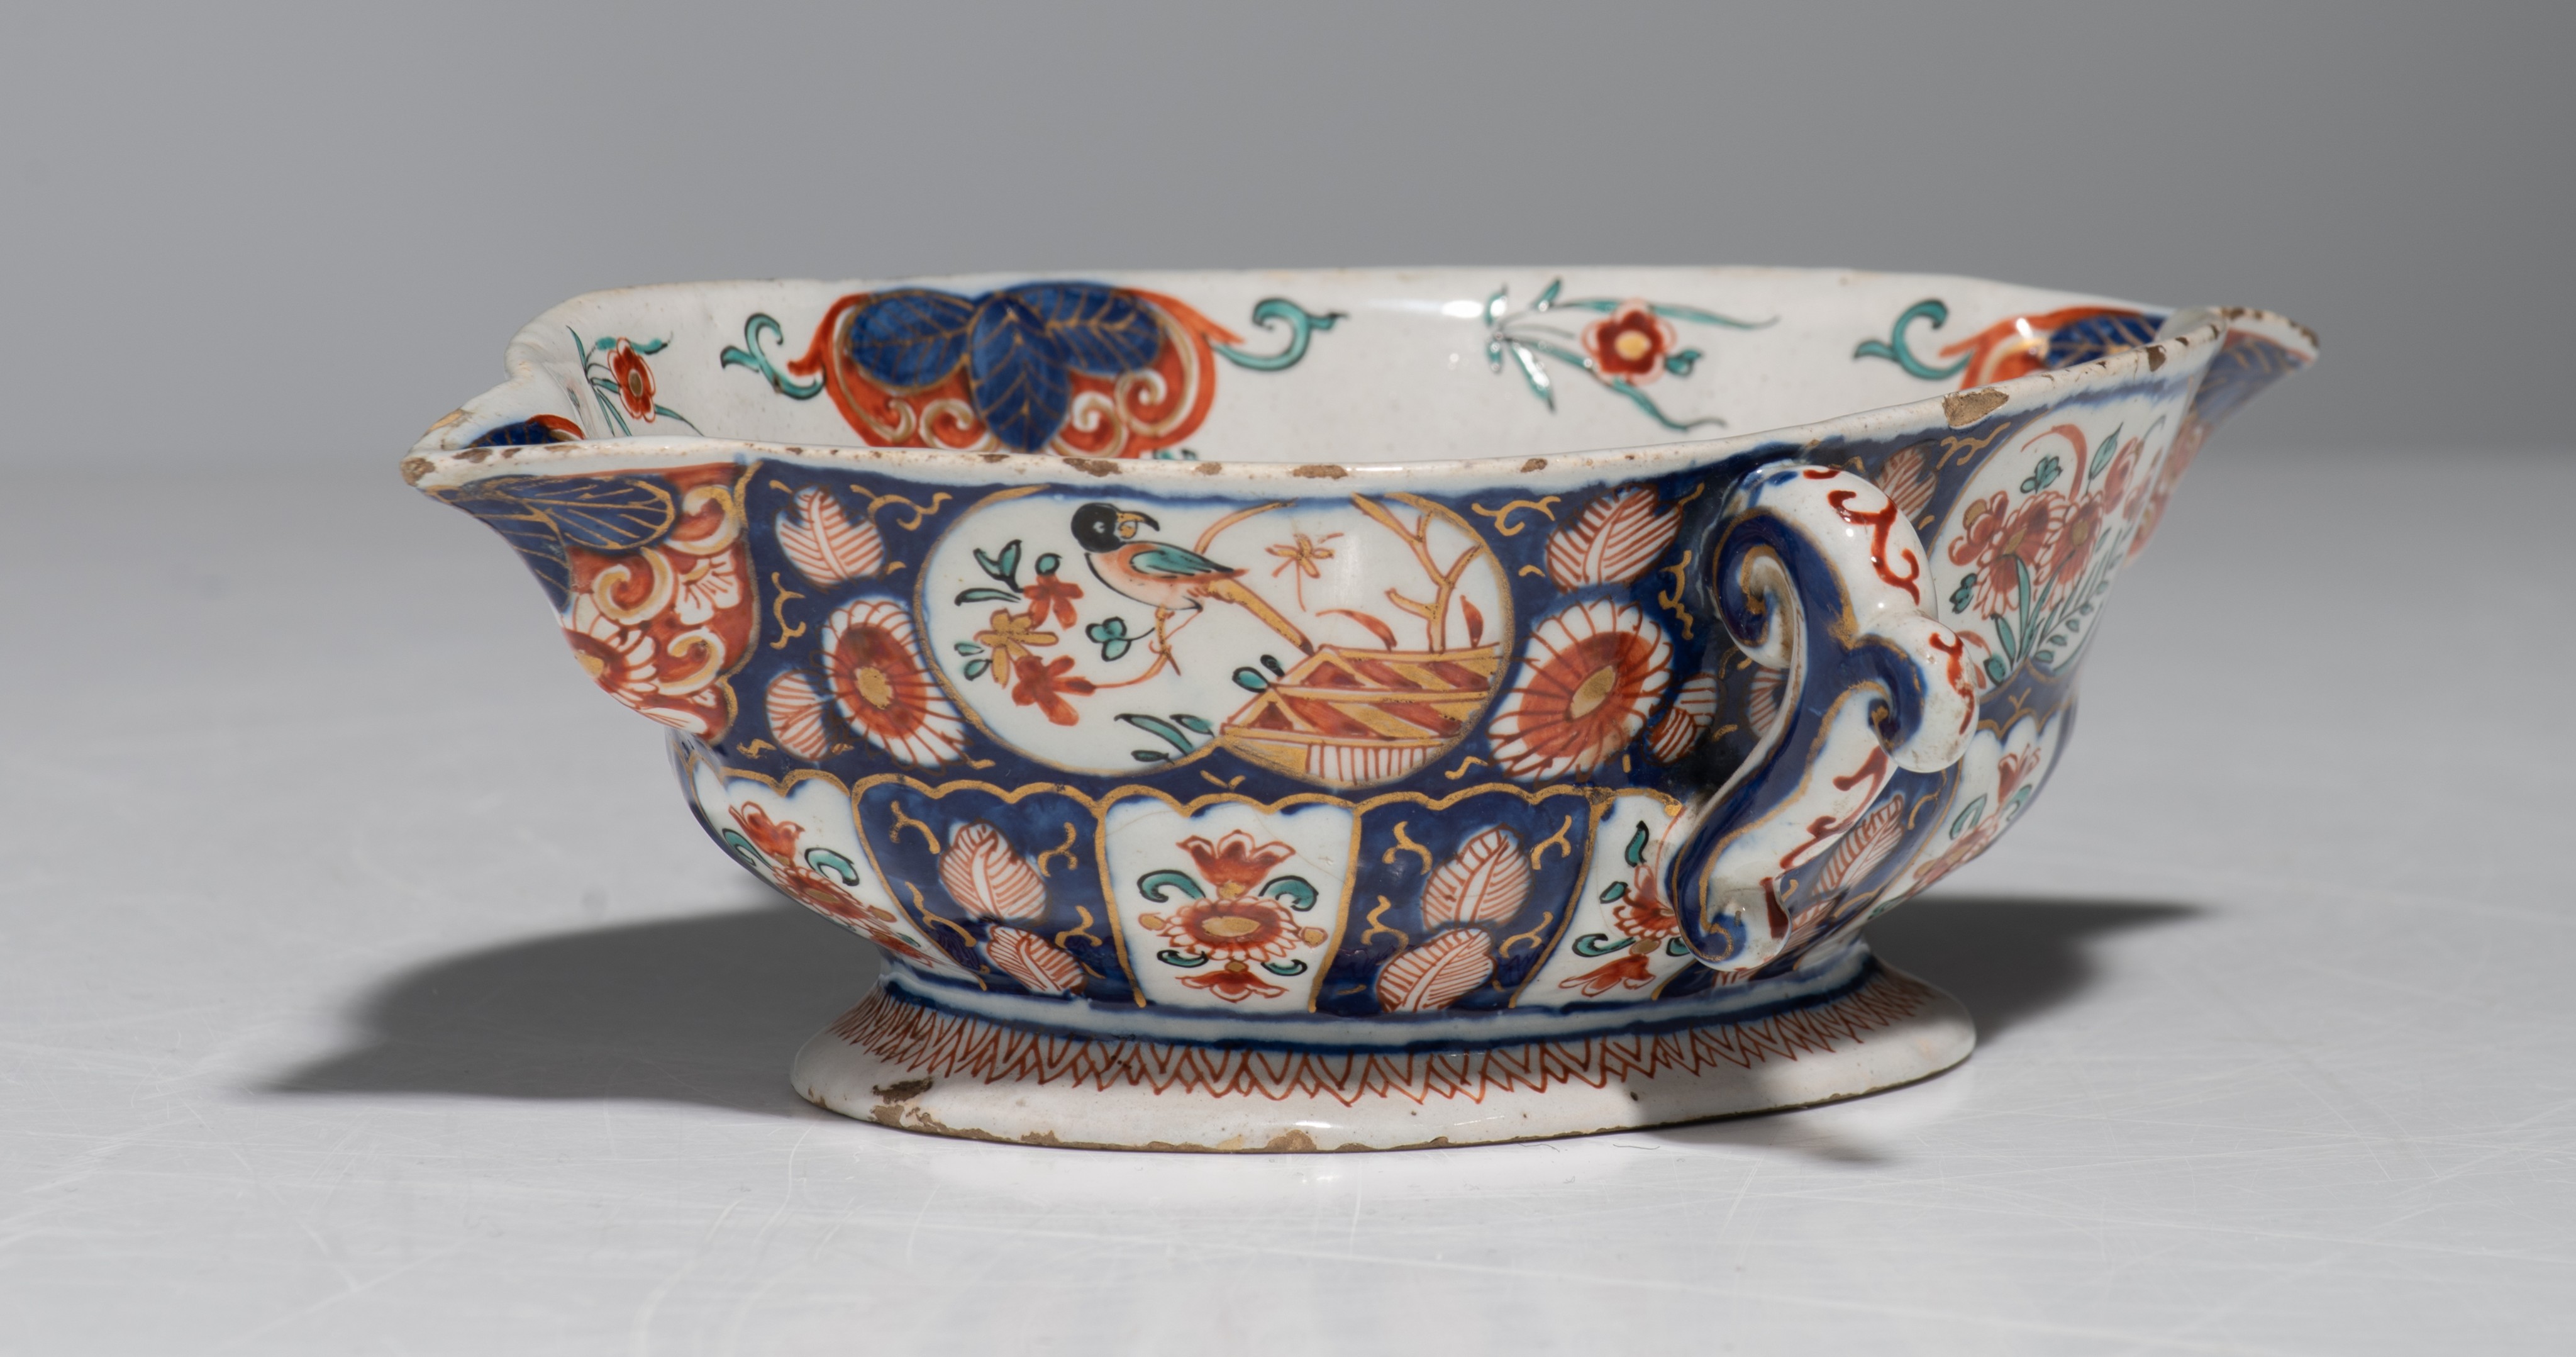 A various collection of 17th/18thC Dutch Delft Imari-style plates and a saucer, ø 22 / H 6 cm - Image 13 of 14